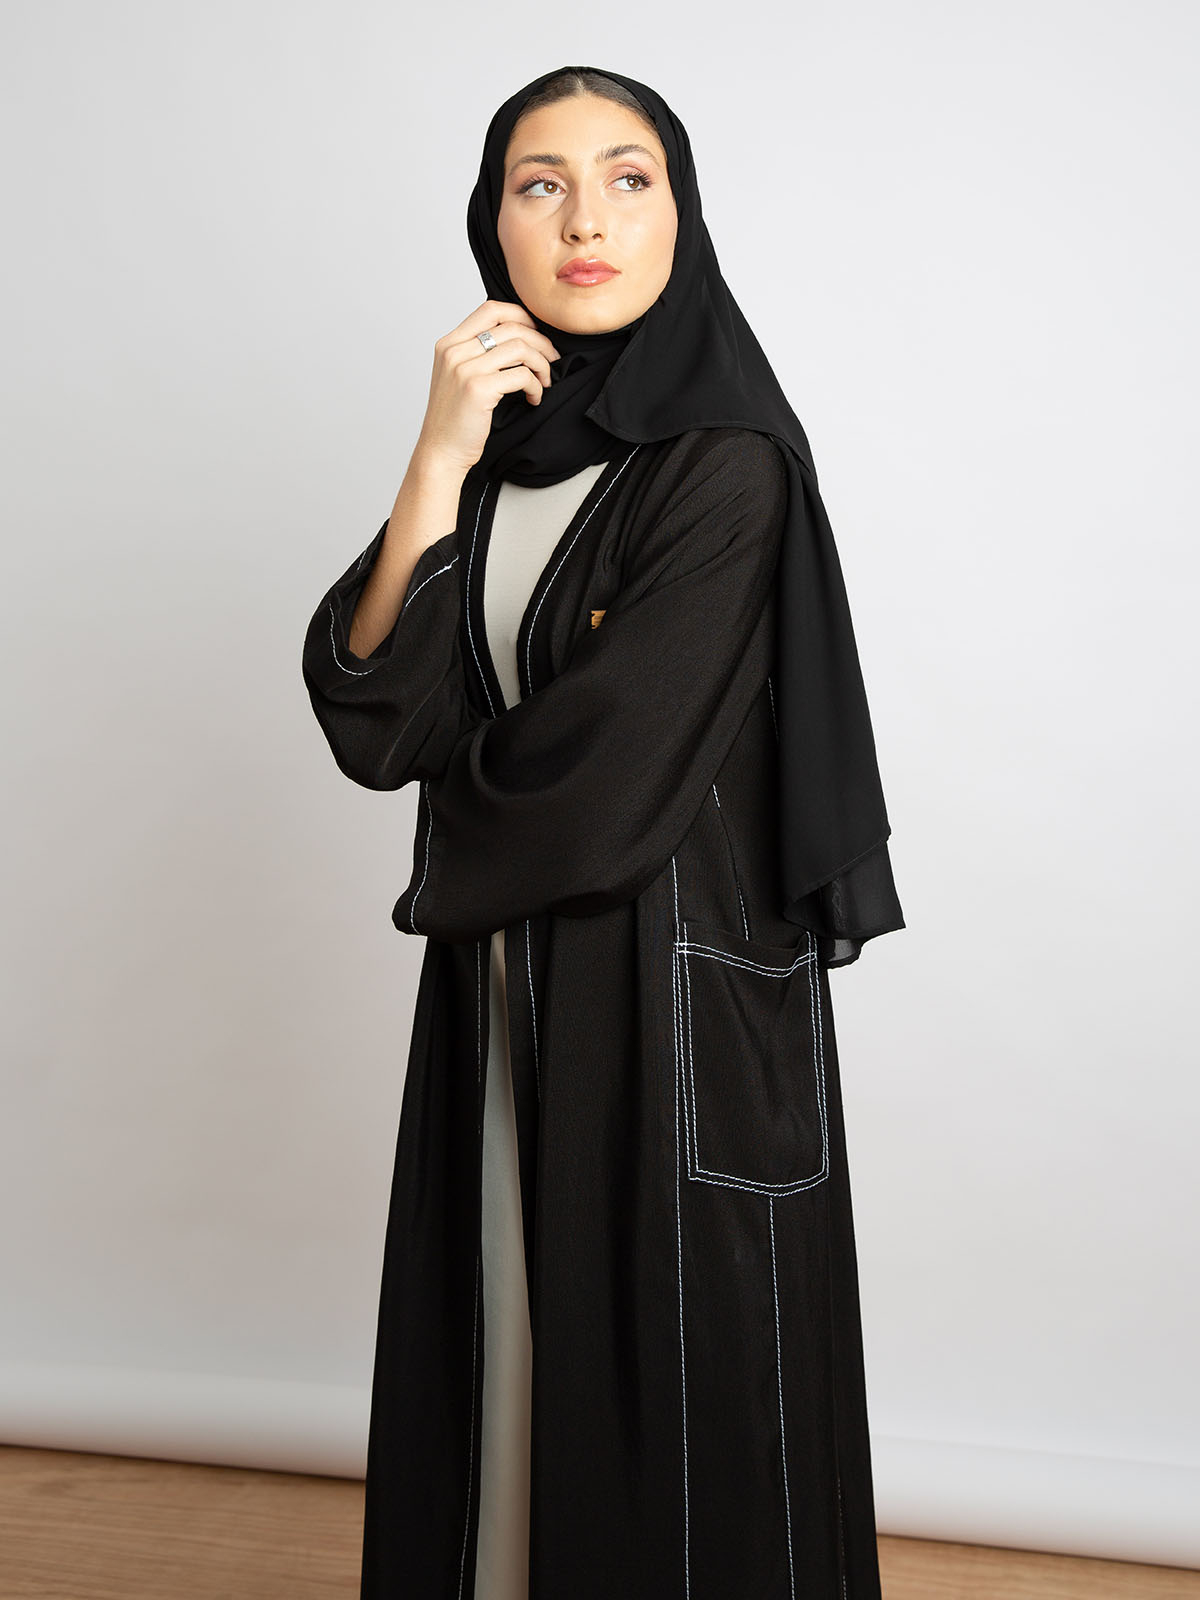 Kaafmeem women clothing regular fit black long practical salona abstract daily abaya with two pockets in lightweight fabric